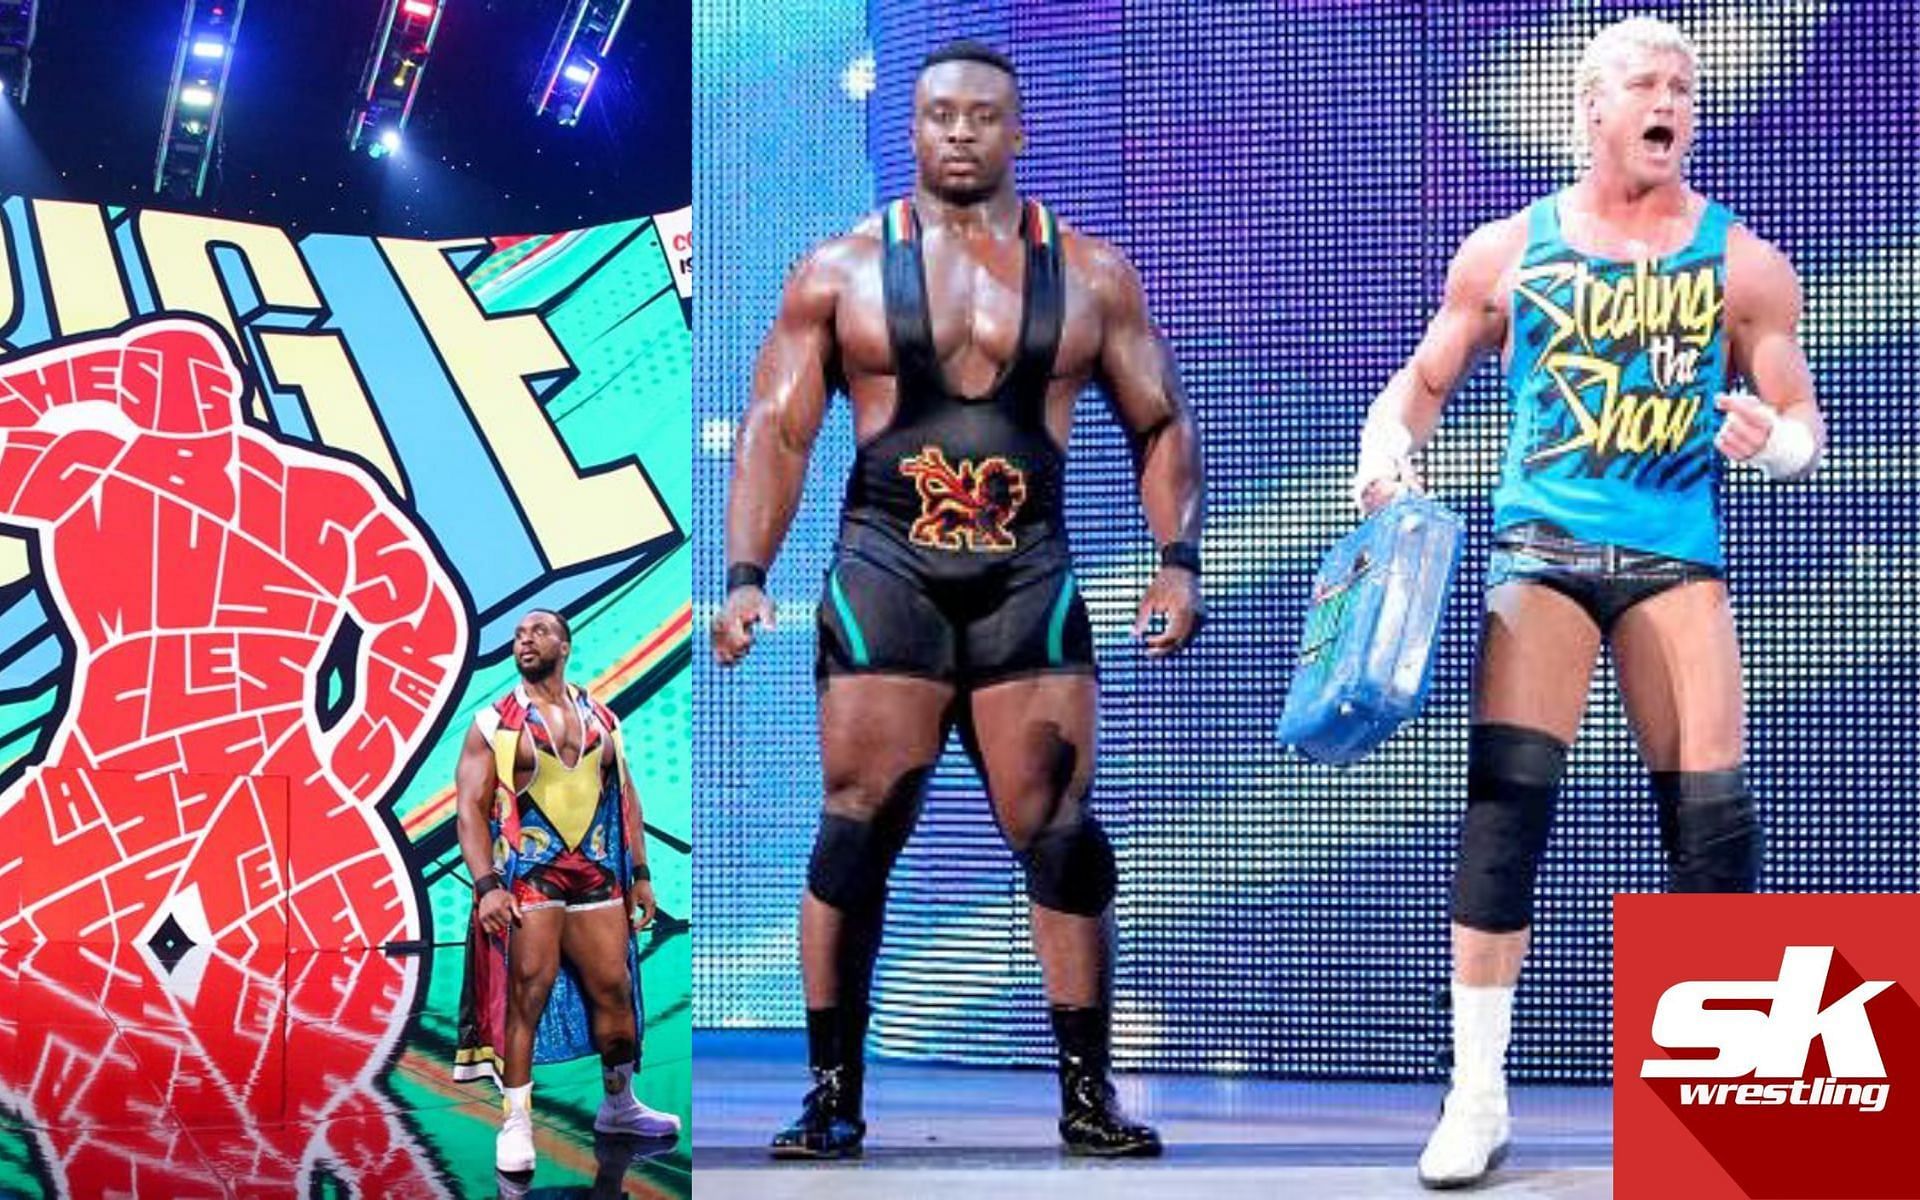 What direction will Big E take when he returns?